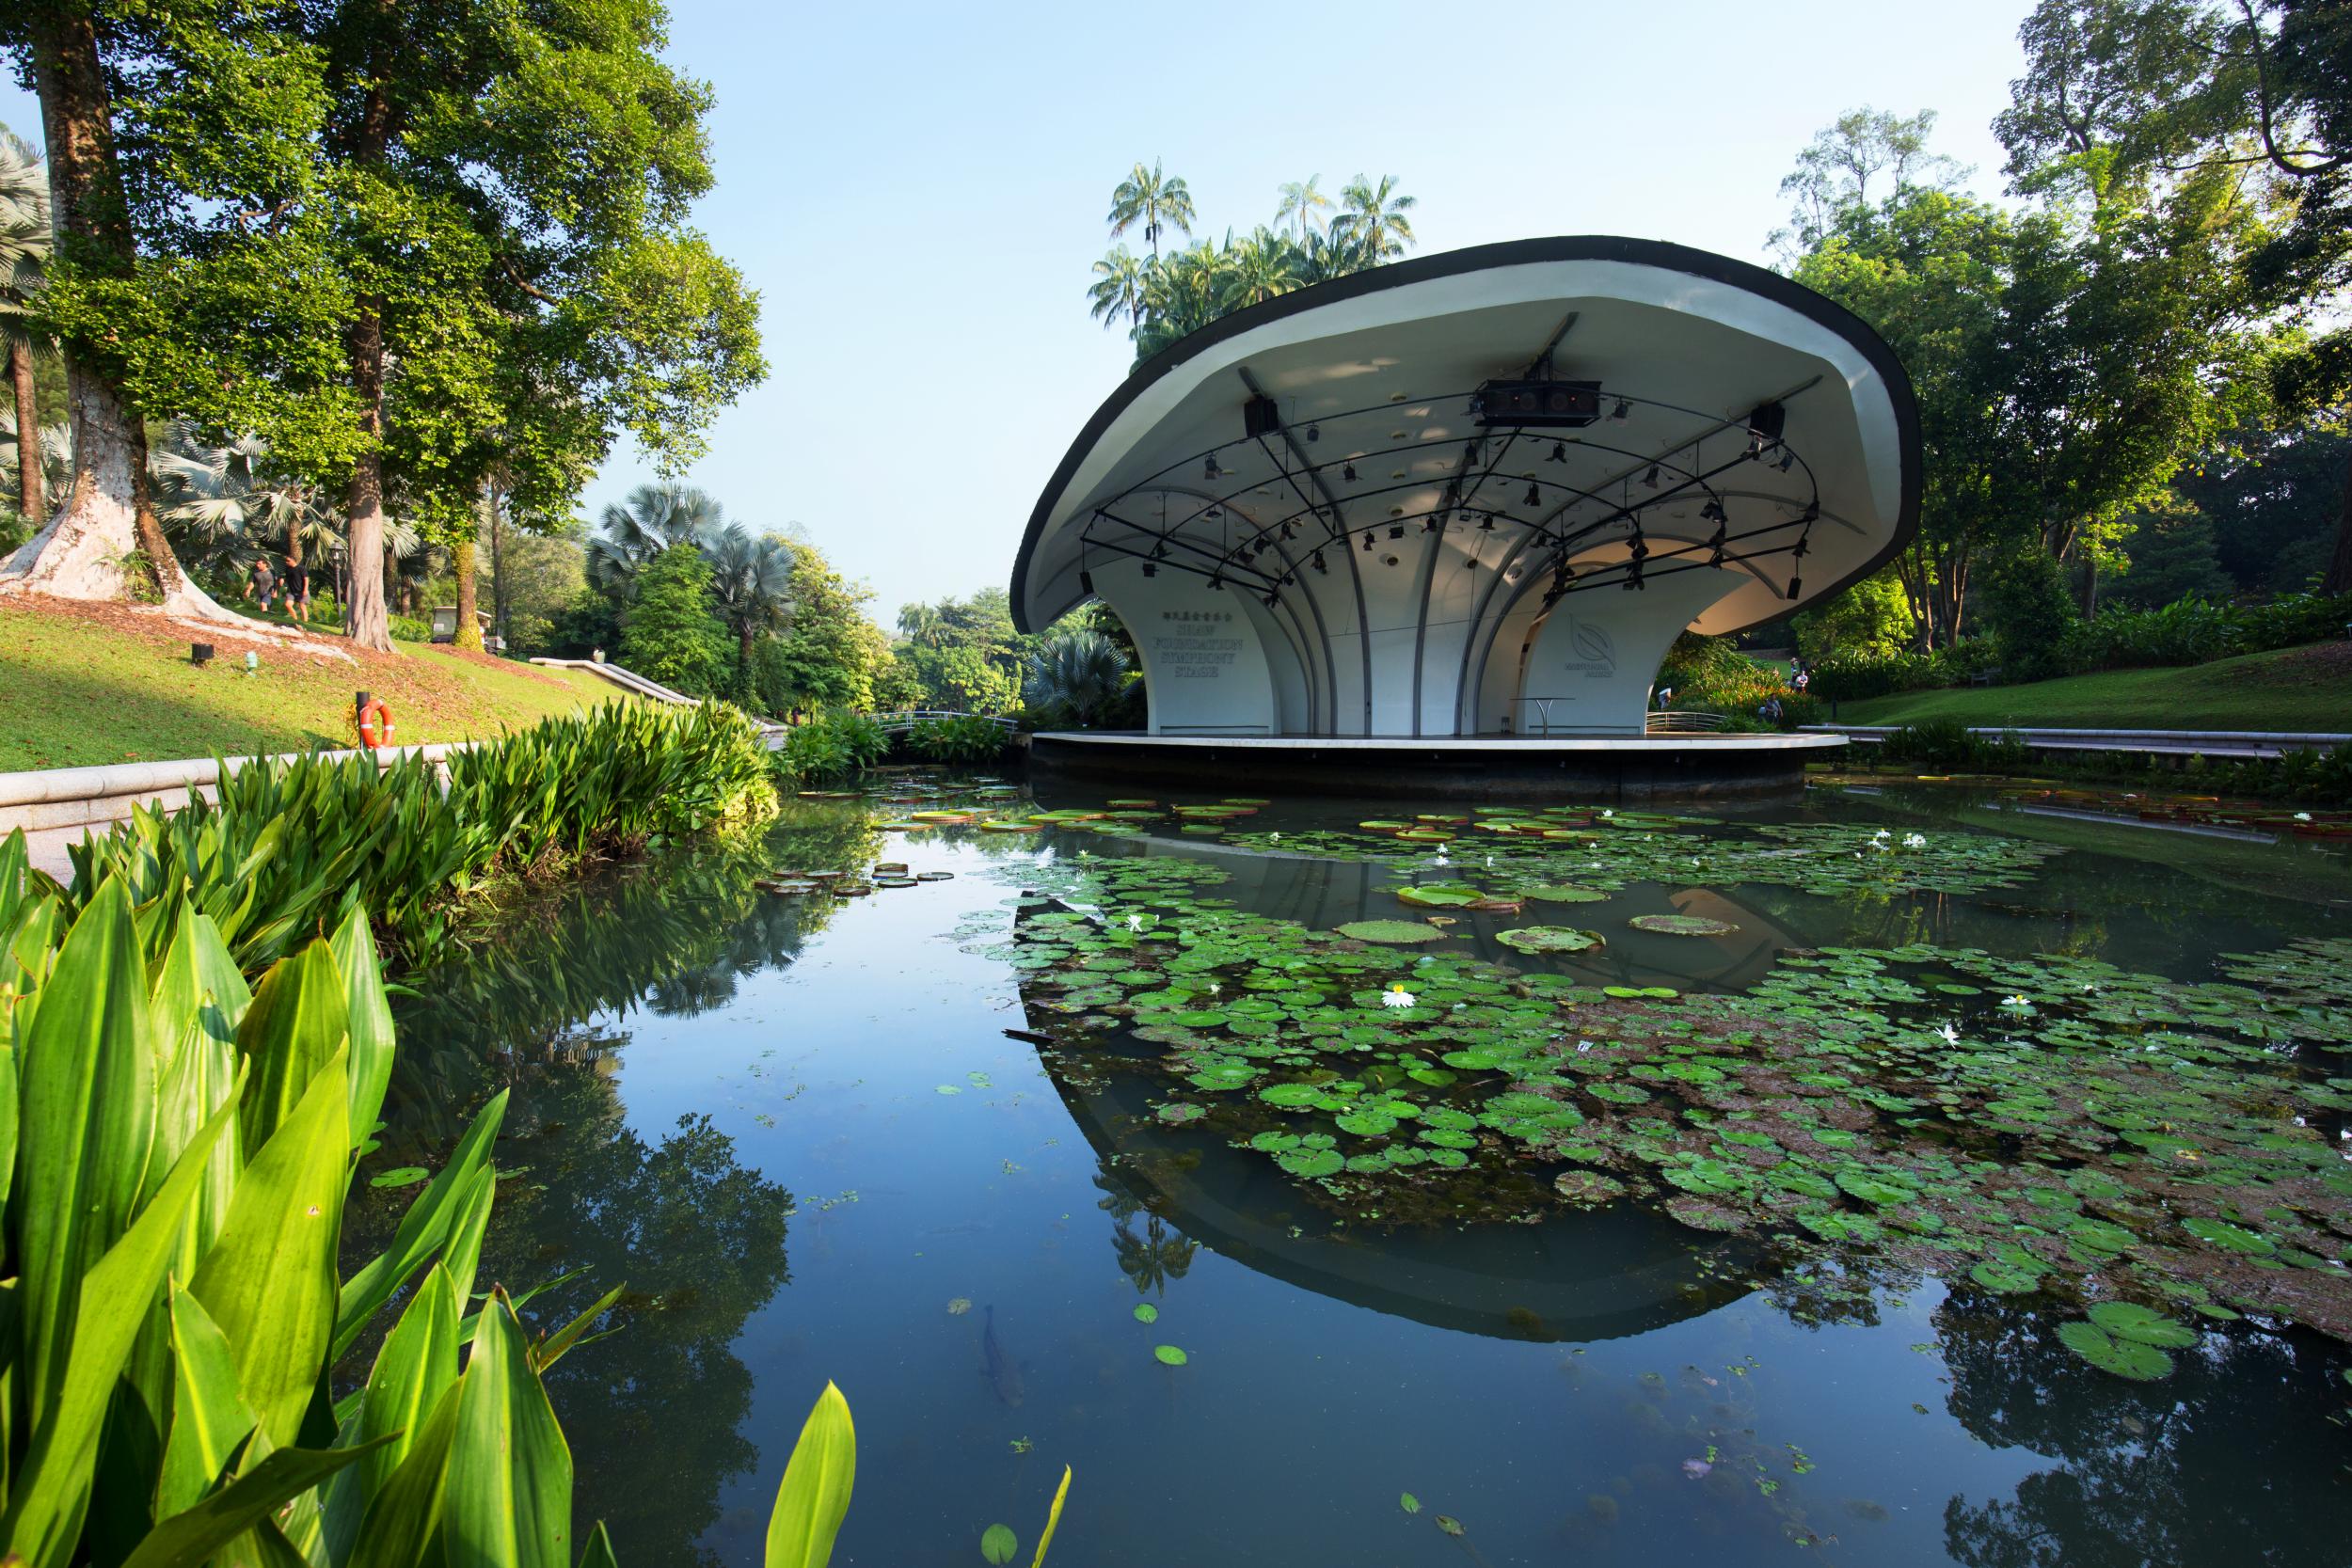 Relieve some of that travel stress at Singapore Botanic Gardens